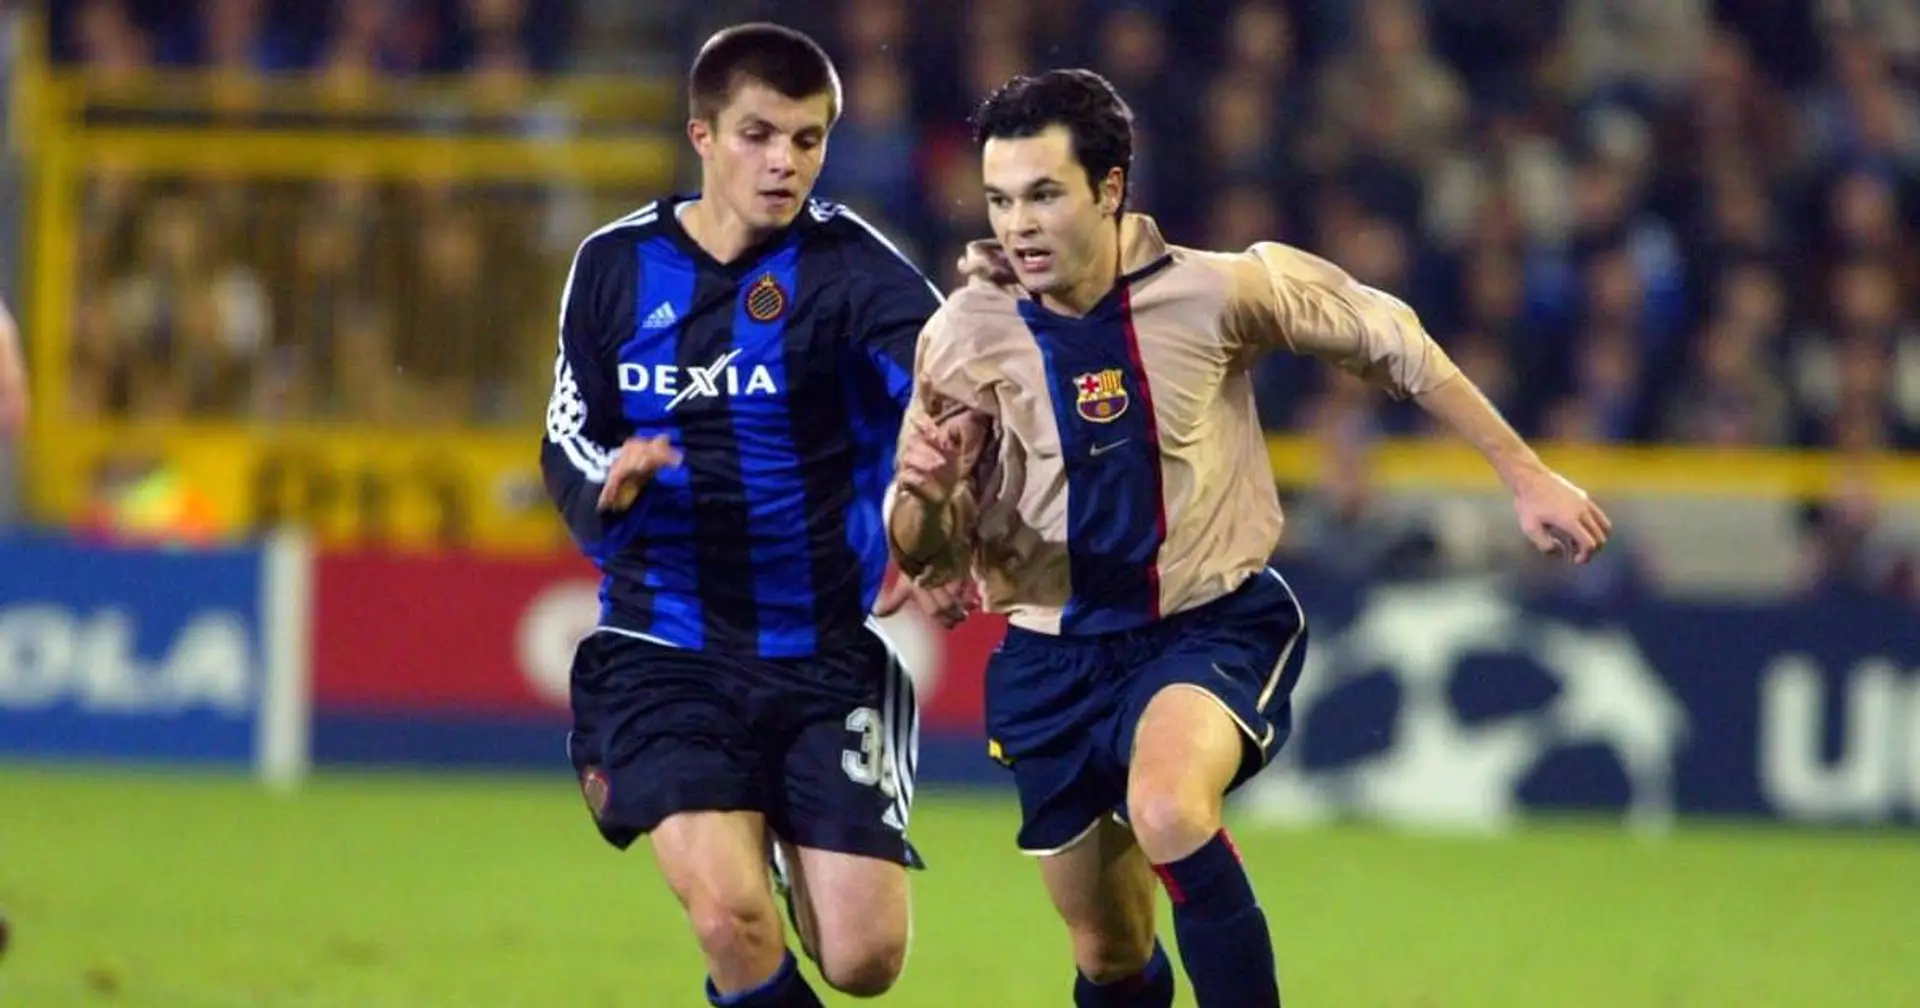 Andres Iniesta made his Barca debut exactly 18 years ago: neither Pedri nor Fati were even born back then